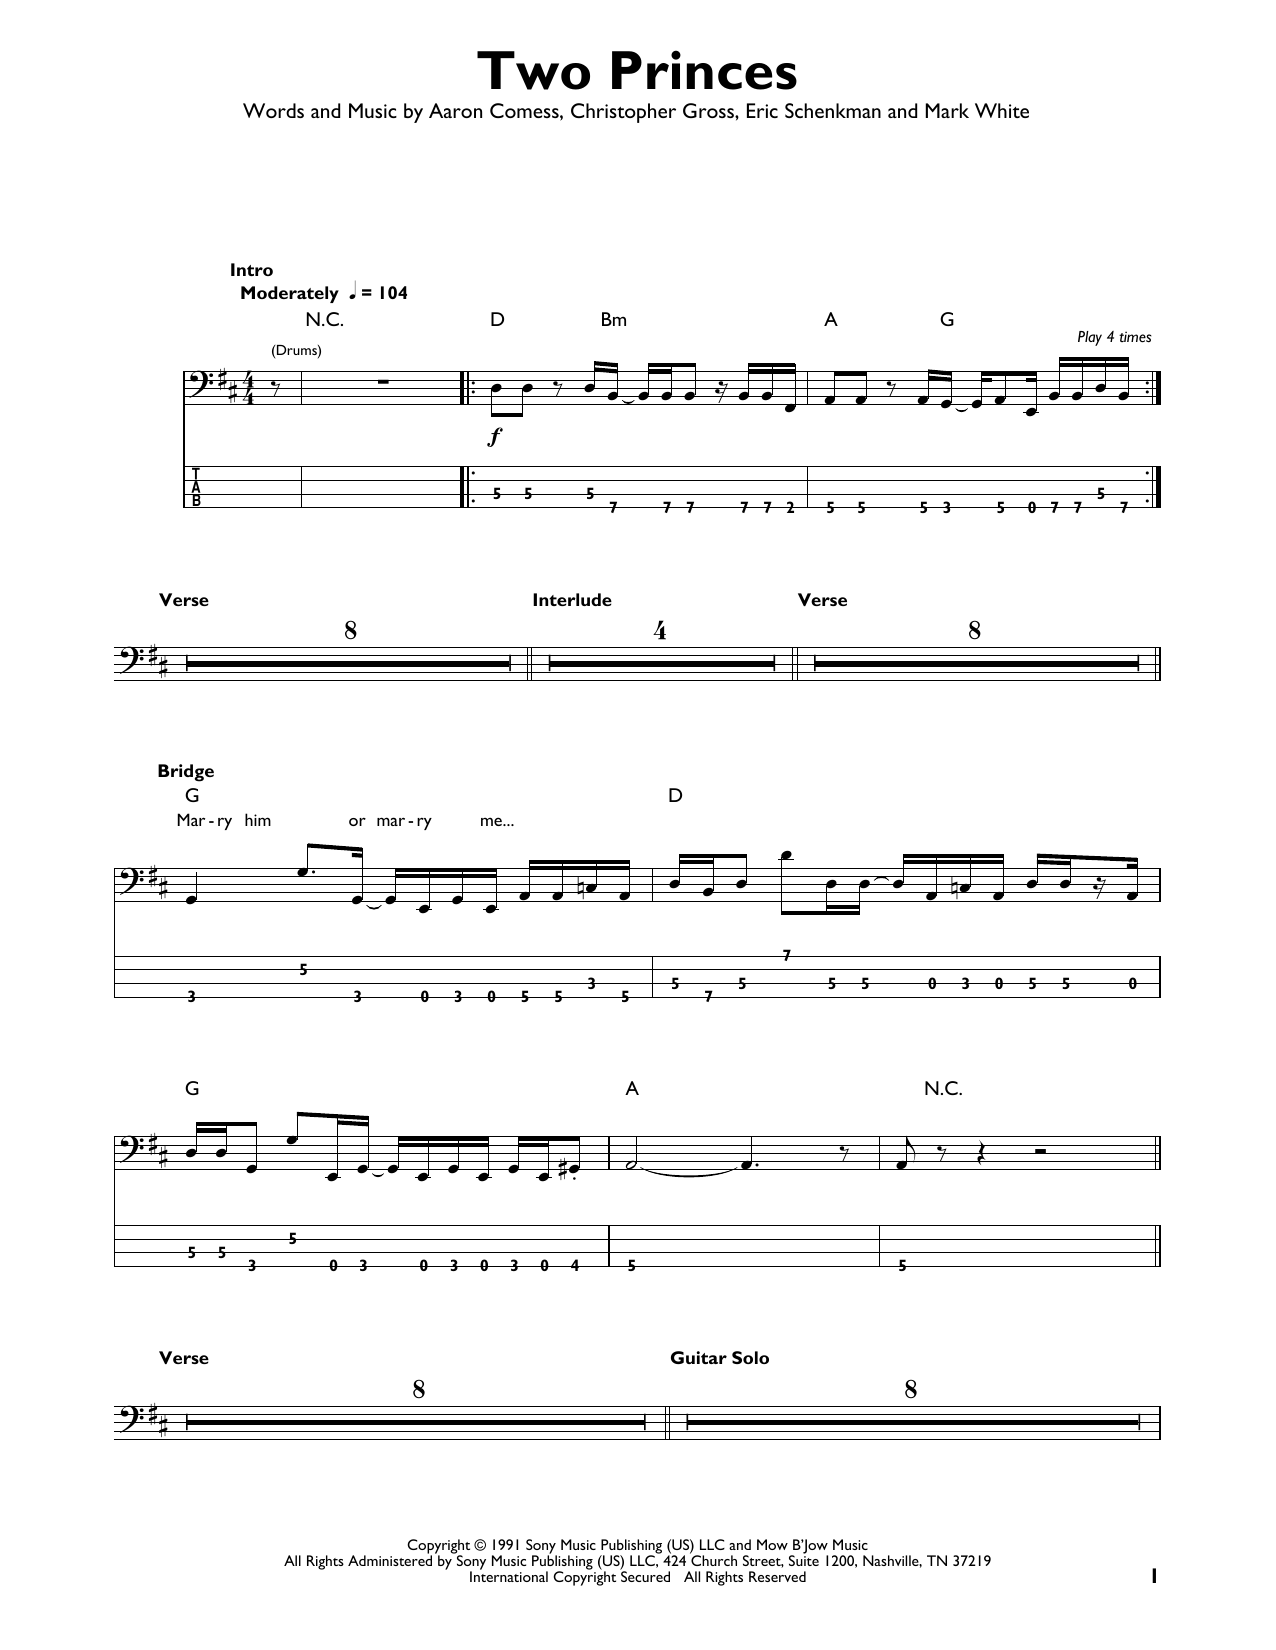 Download Spin Doctors Two Princes Sheet Music